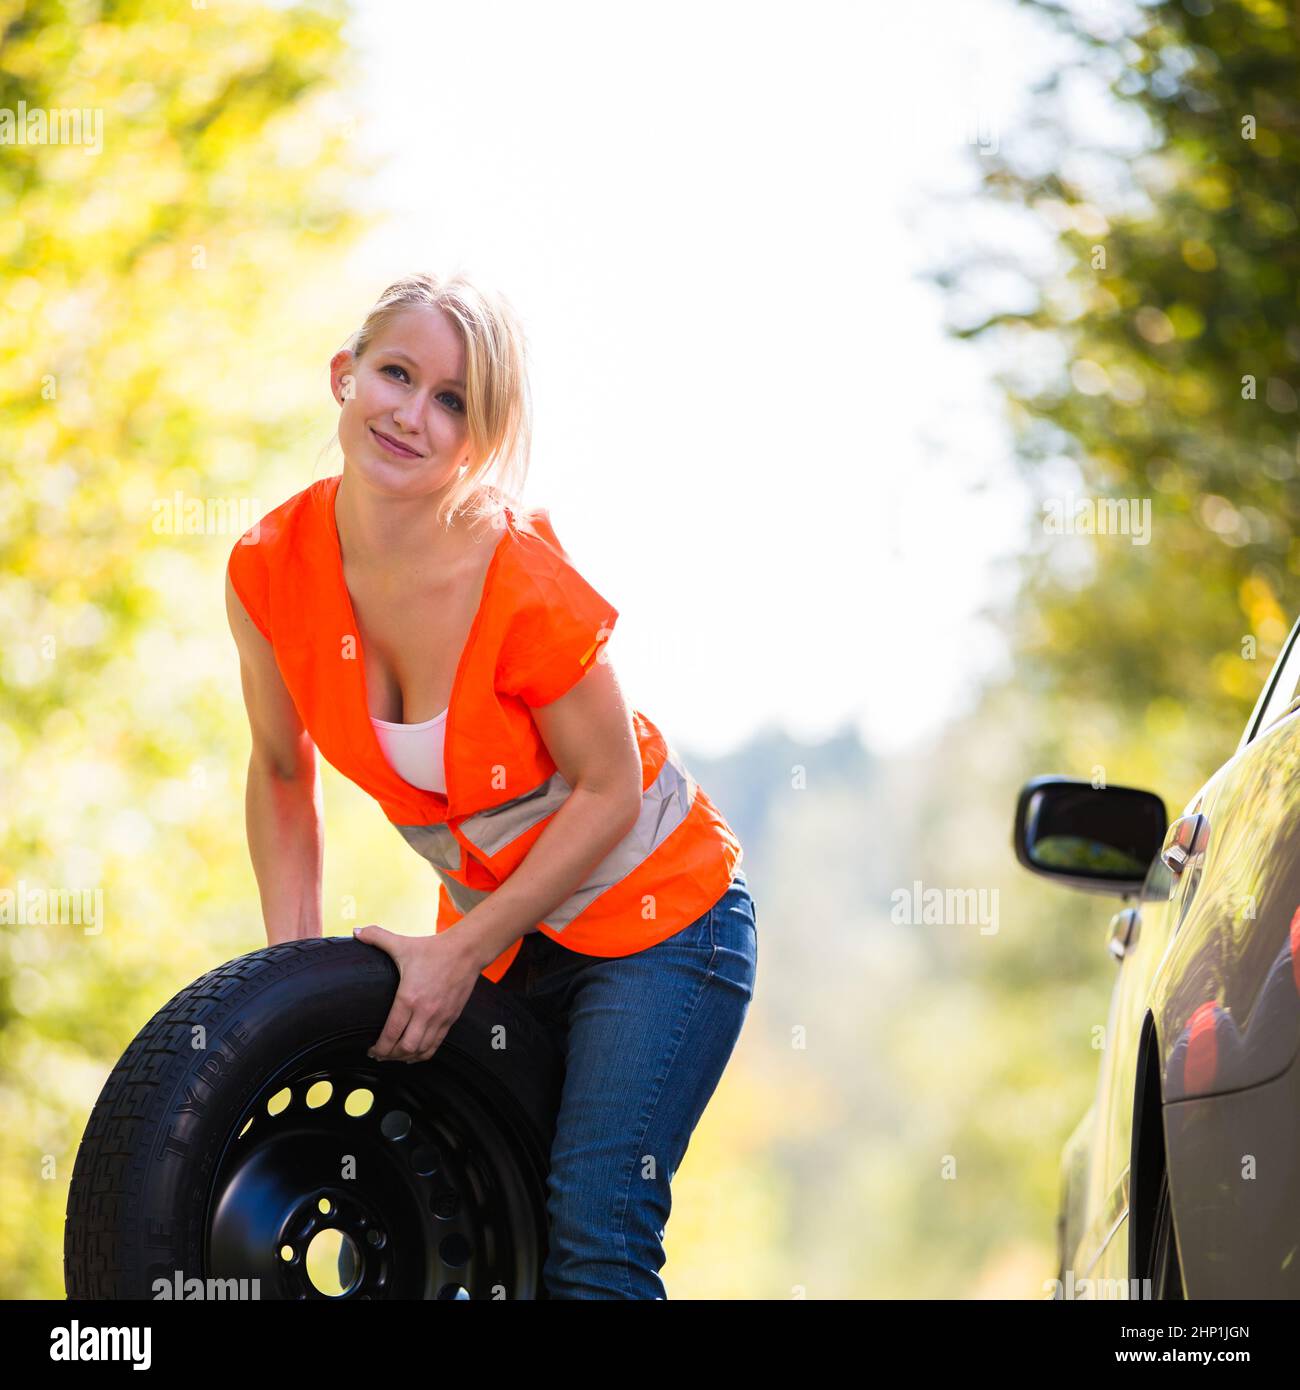 Young female driver wearing a high visibility vest, calling the roadside service/assistance after her car has broken down Stock Photo